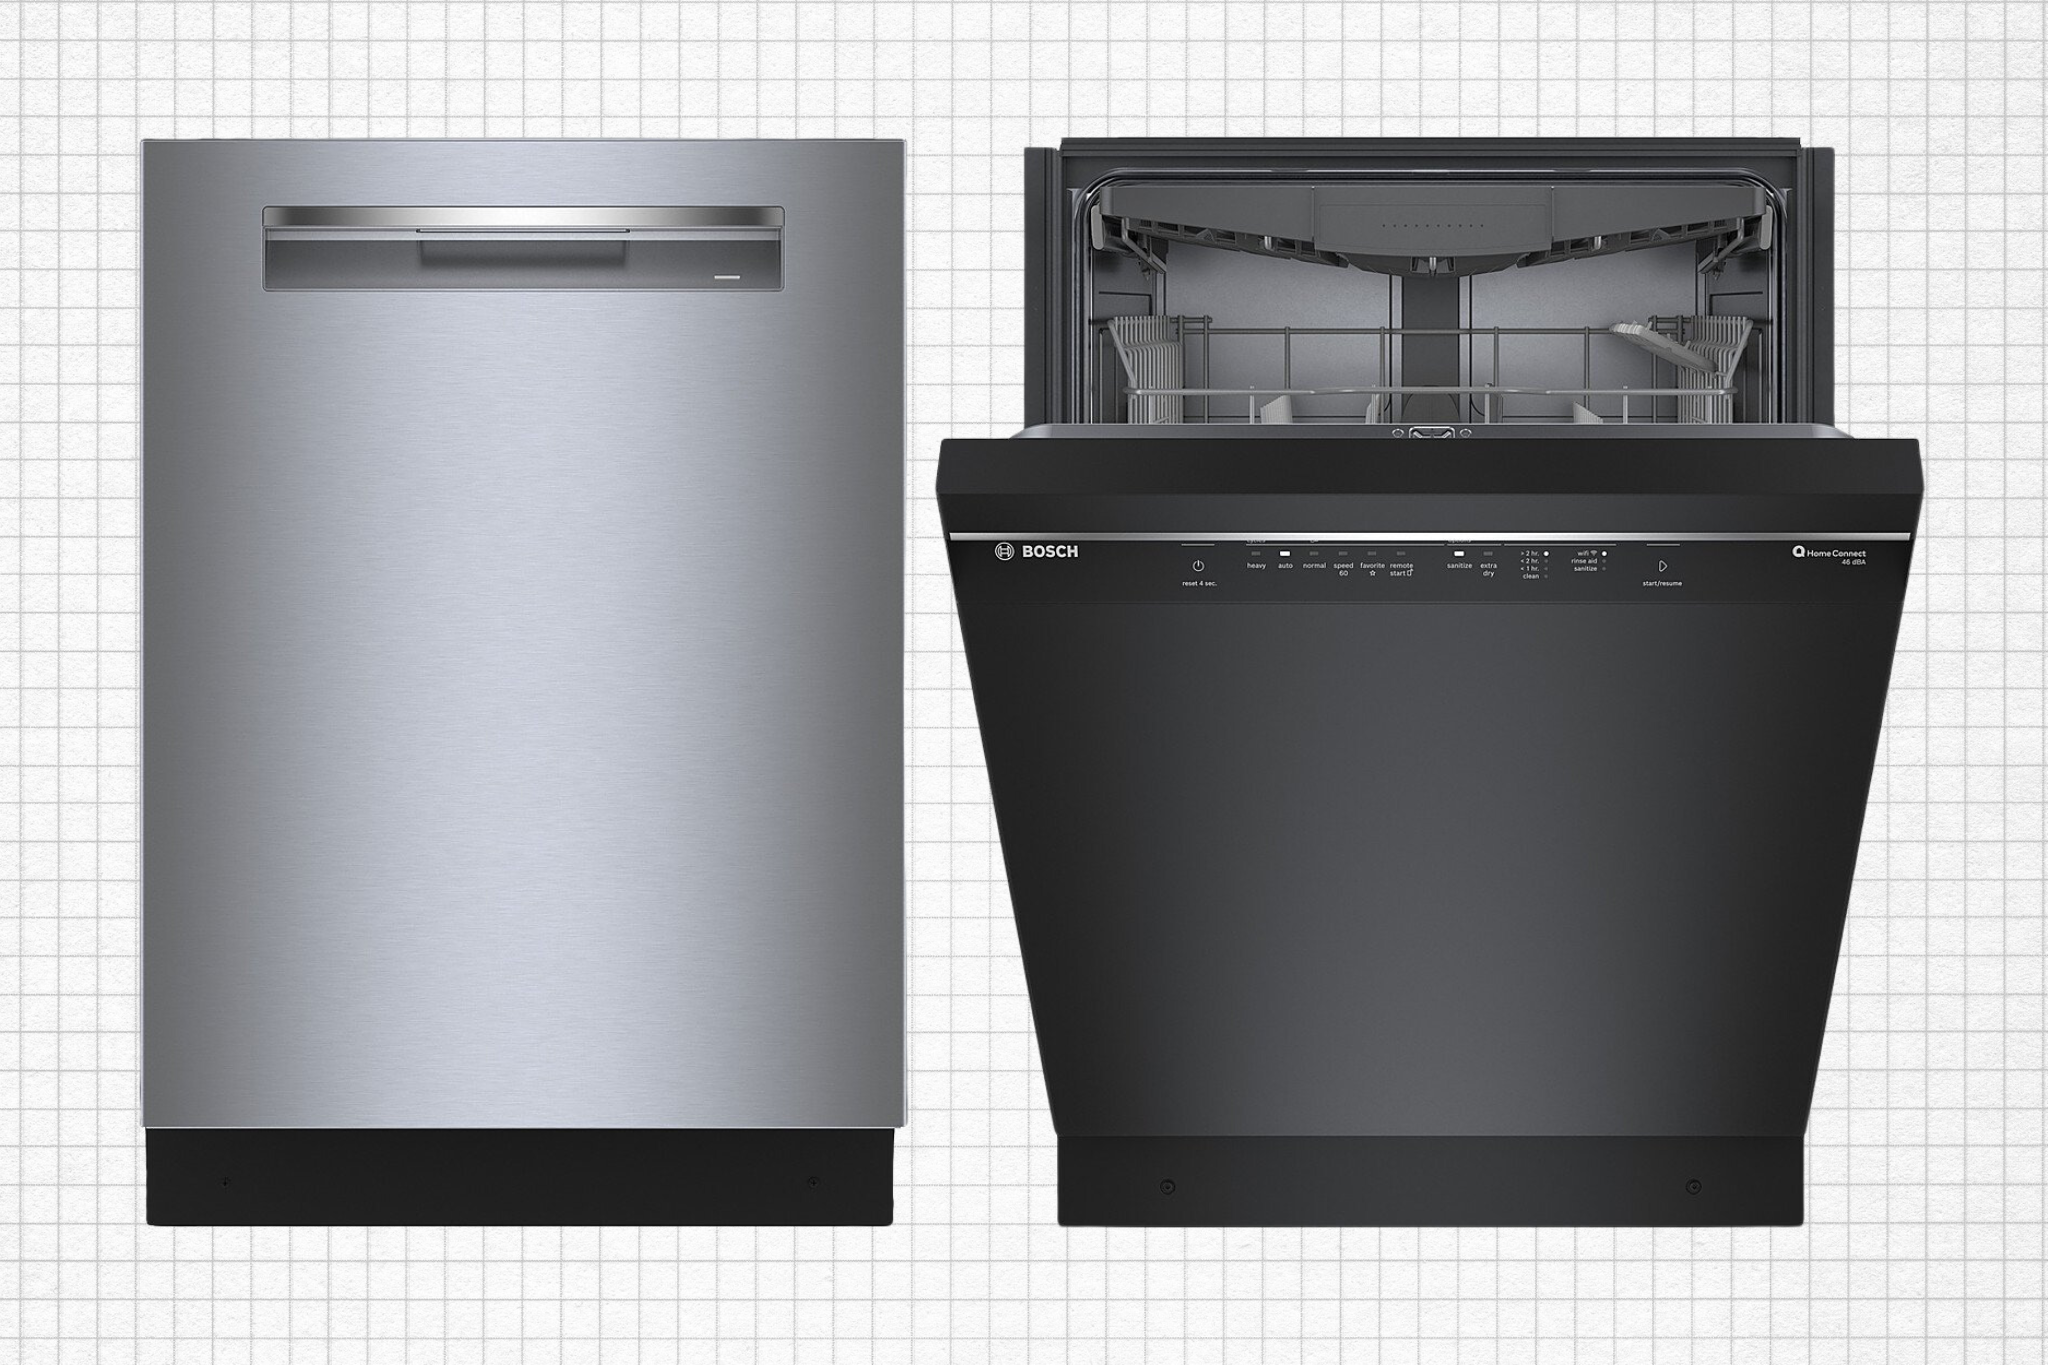 Bosch benchmark series dishwasher and Bosch 300 series dishwasher isolated on grid paper background